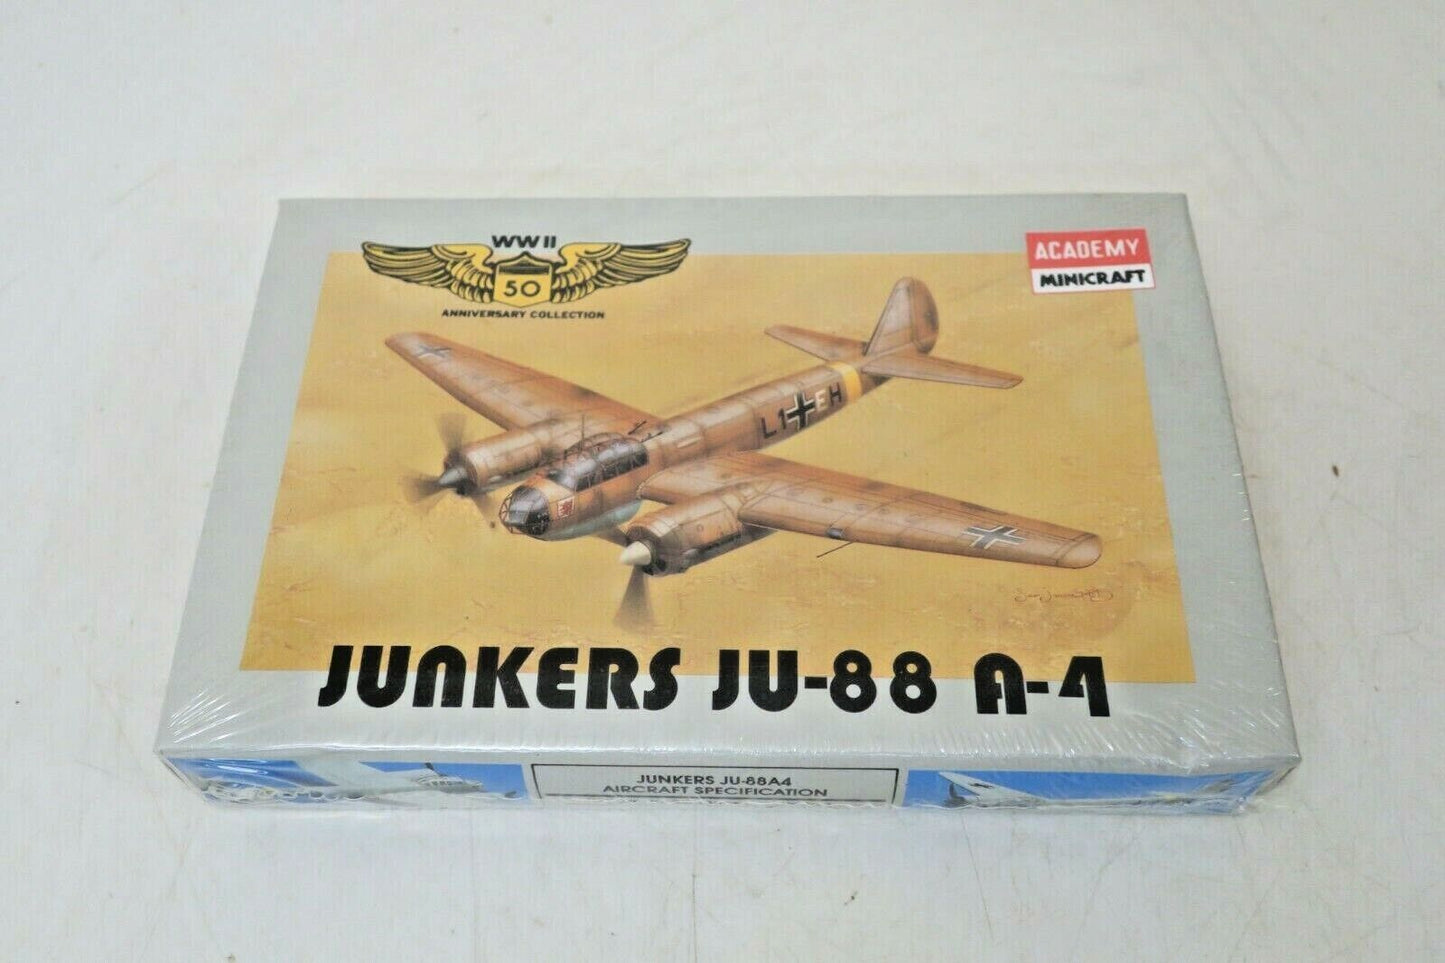 Academy #4407 1/144 Junkers JU-88 A-4 Military Airplane Model Kit